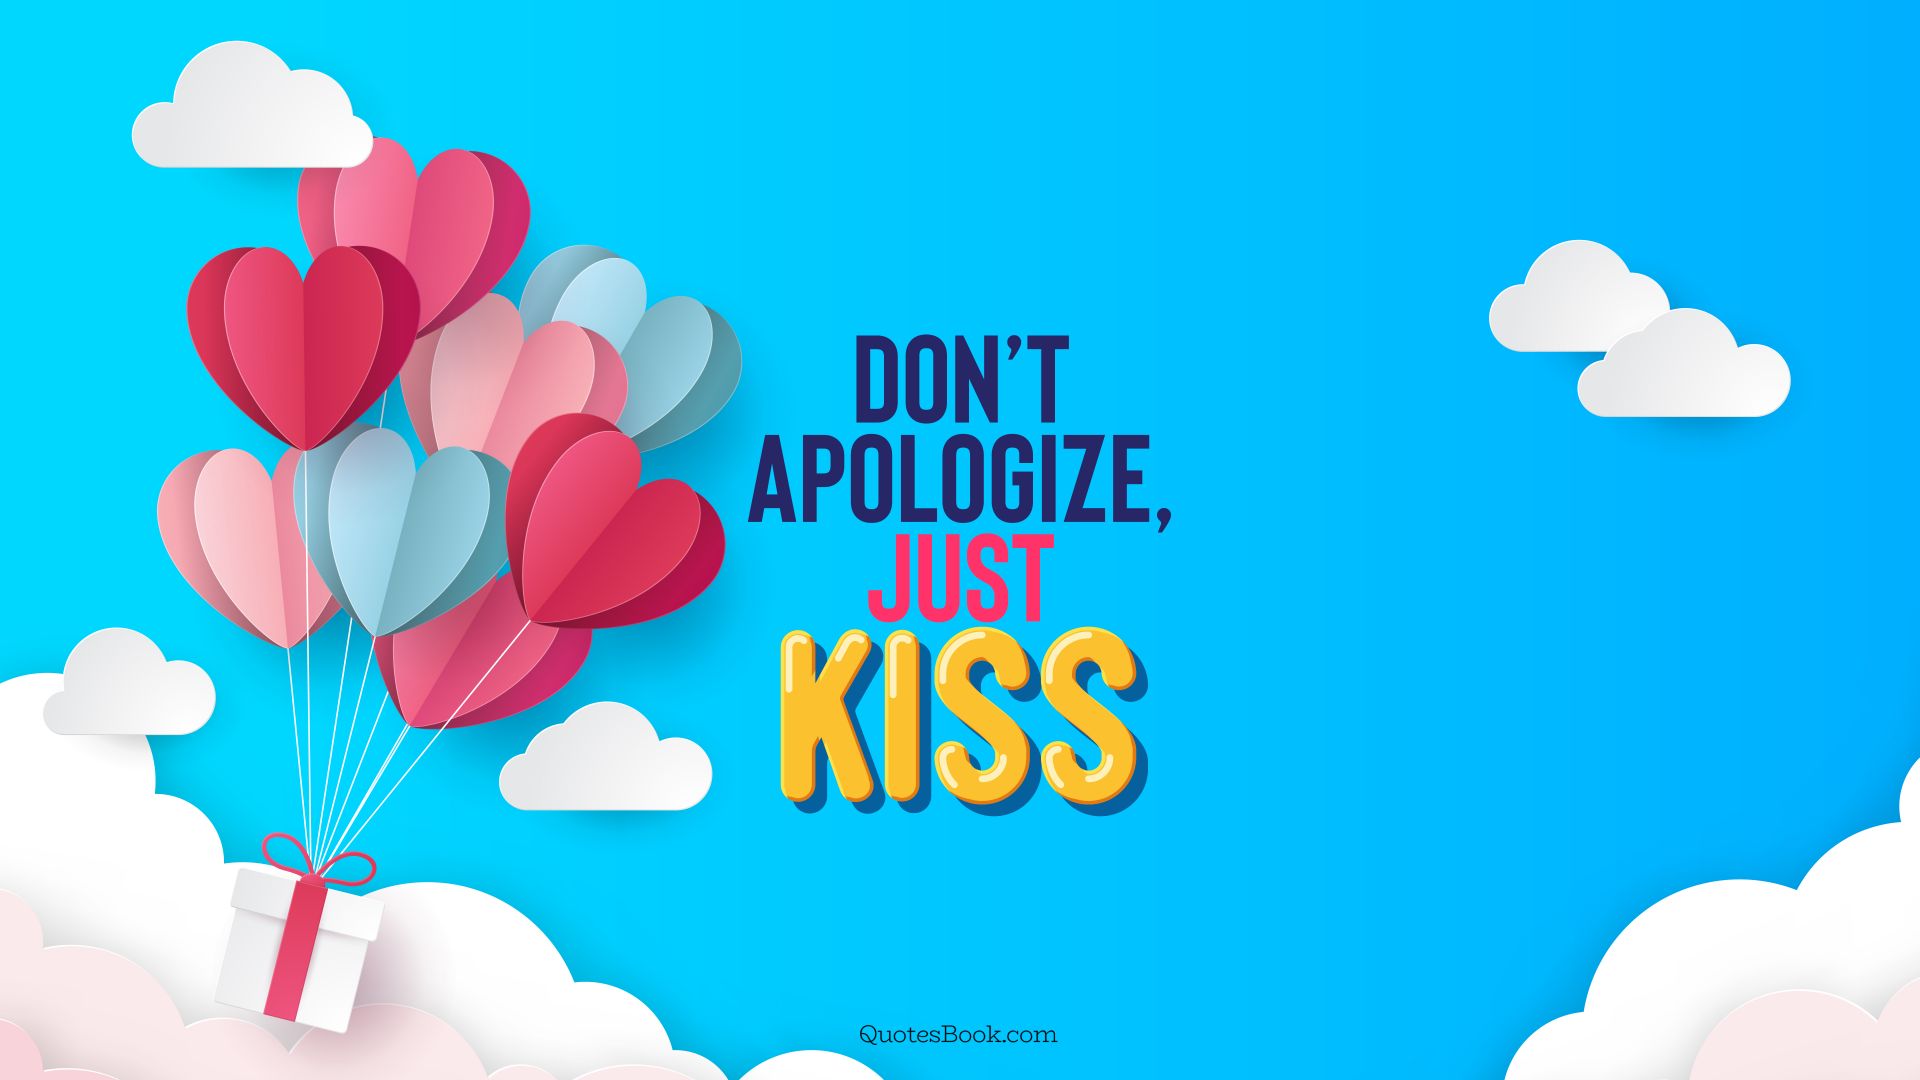 Don’t apologize, just kiss. - Quote by QuotesBook